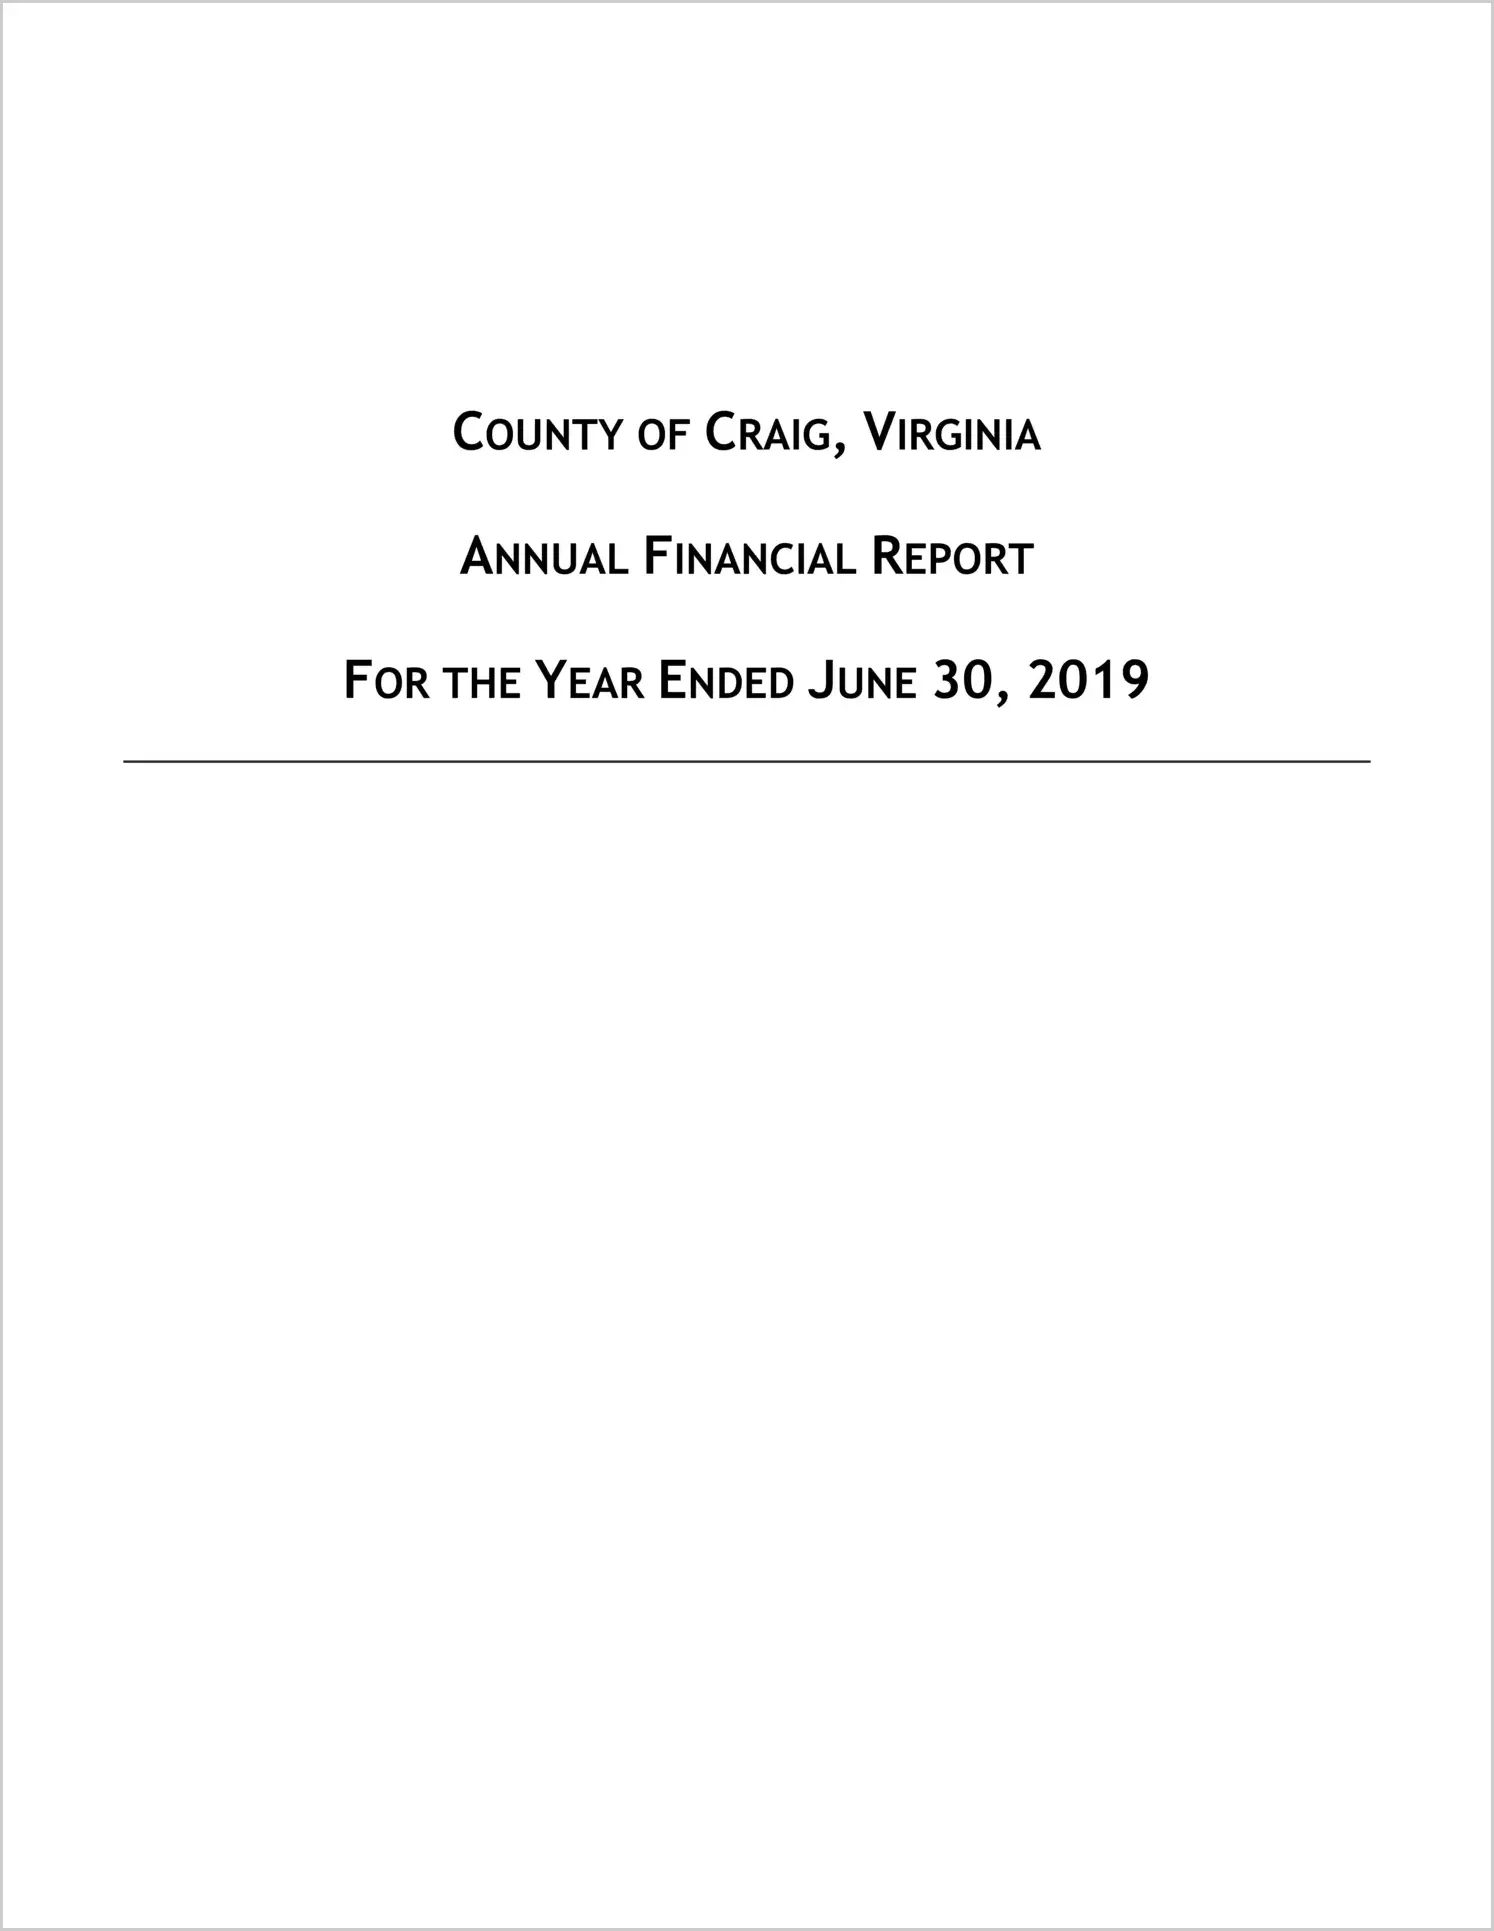 2019 Annual Financial Report for County of Craig